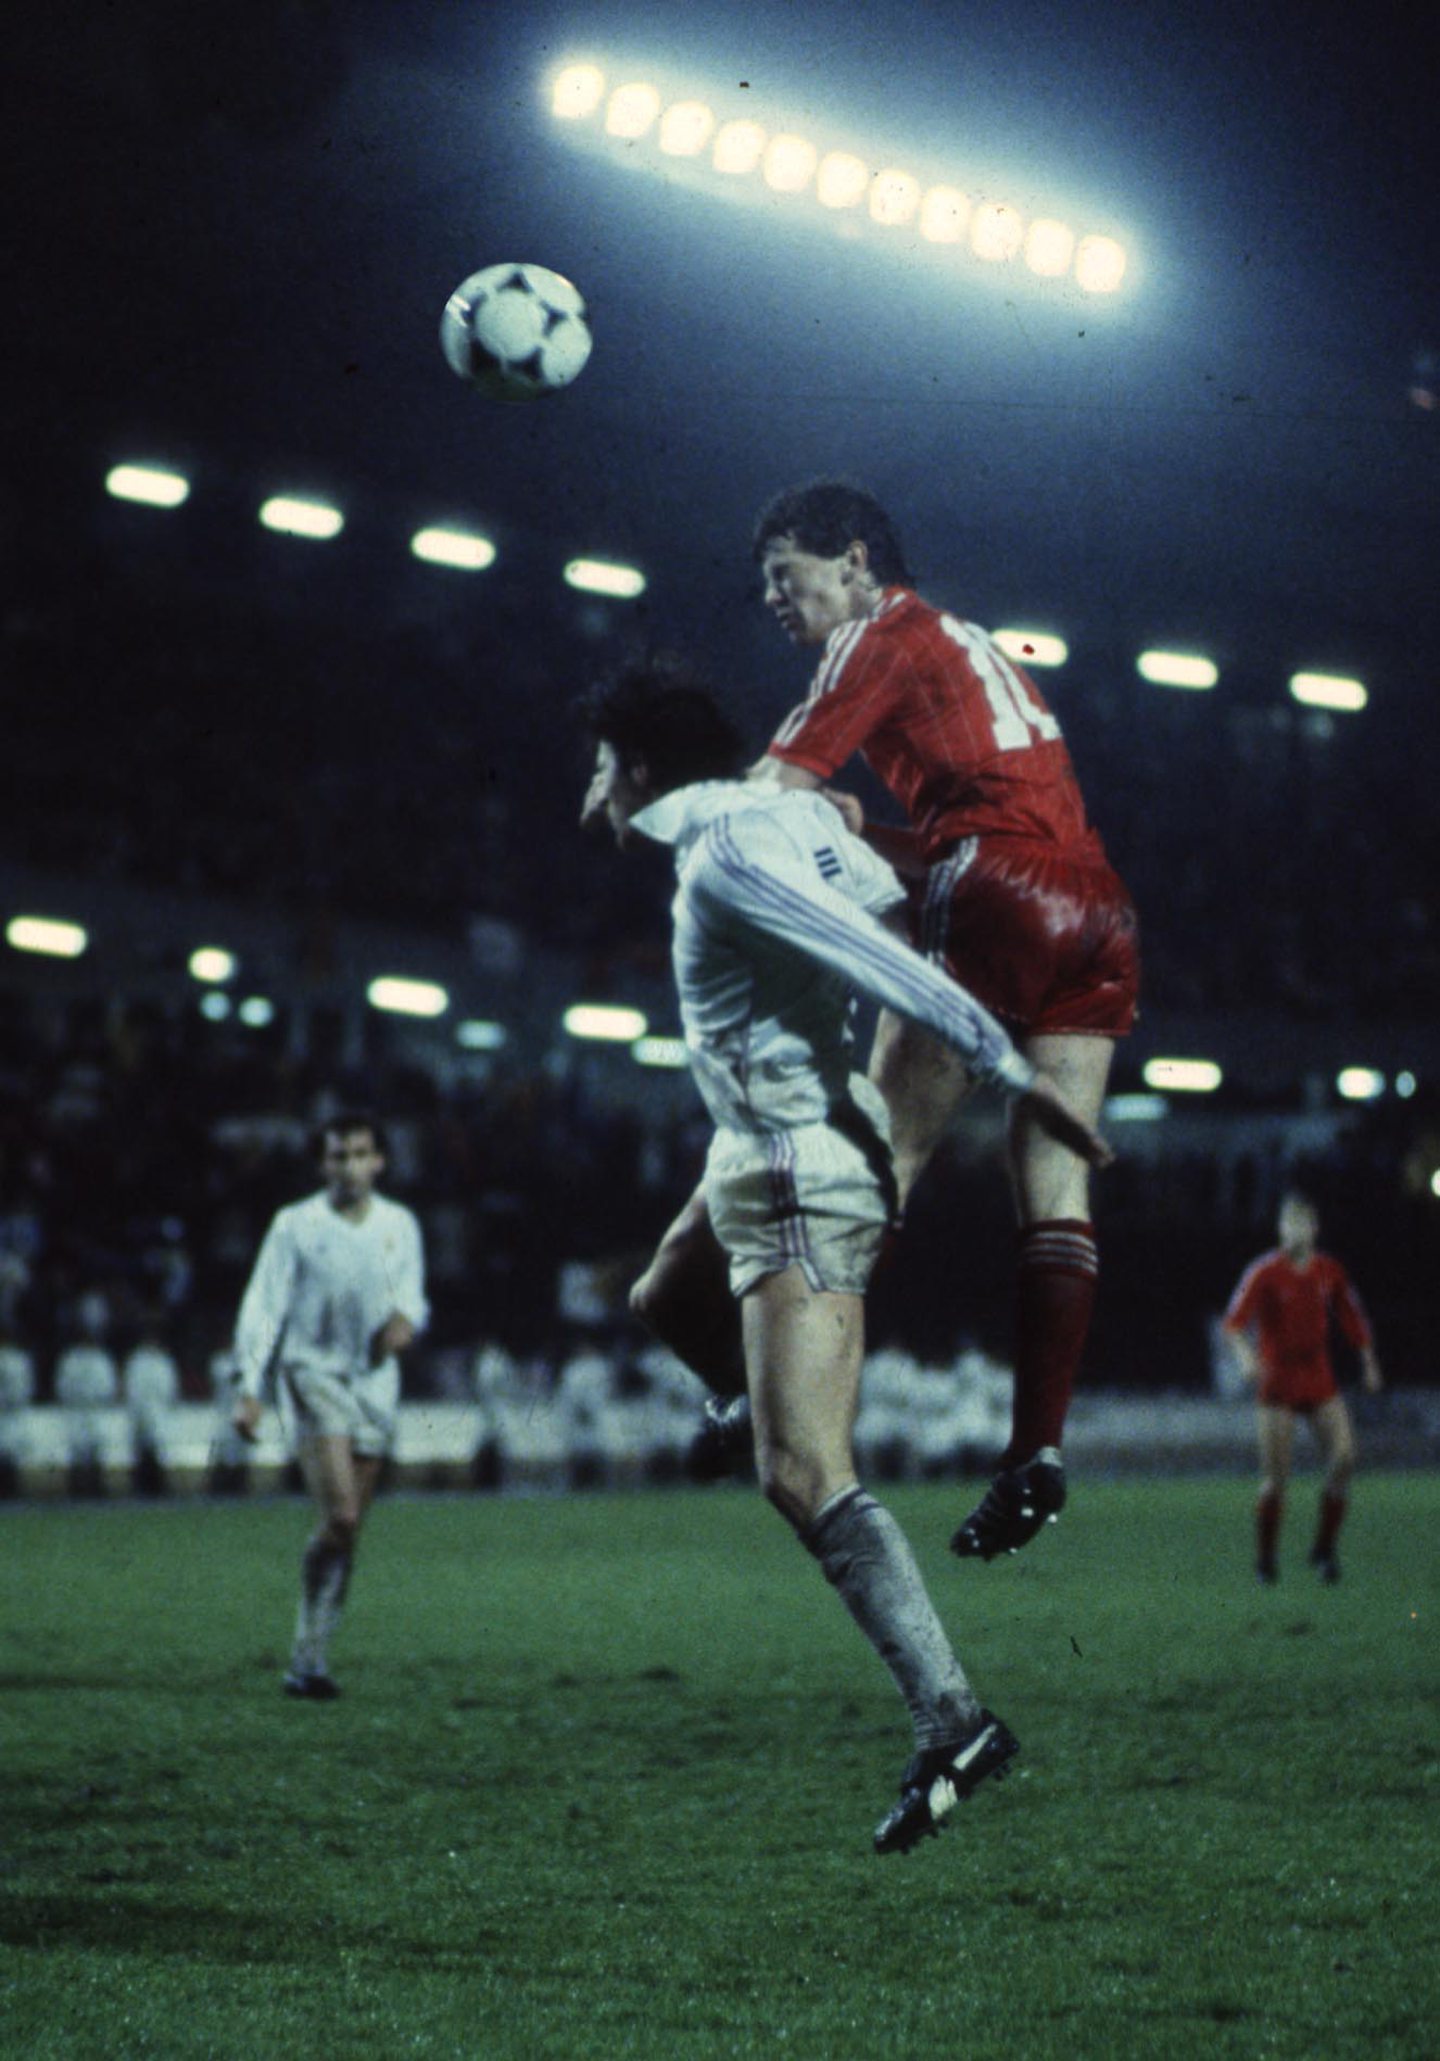 Aberdeen's Eric Black (right) jumps above Paco Bonet of Real Madrid. Image: Shutterstock.